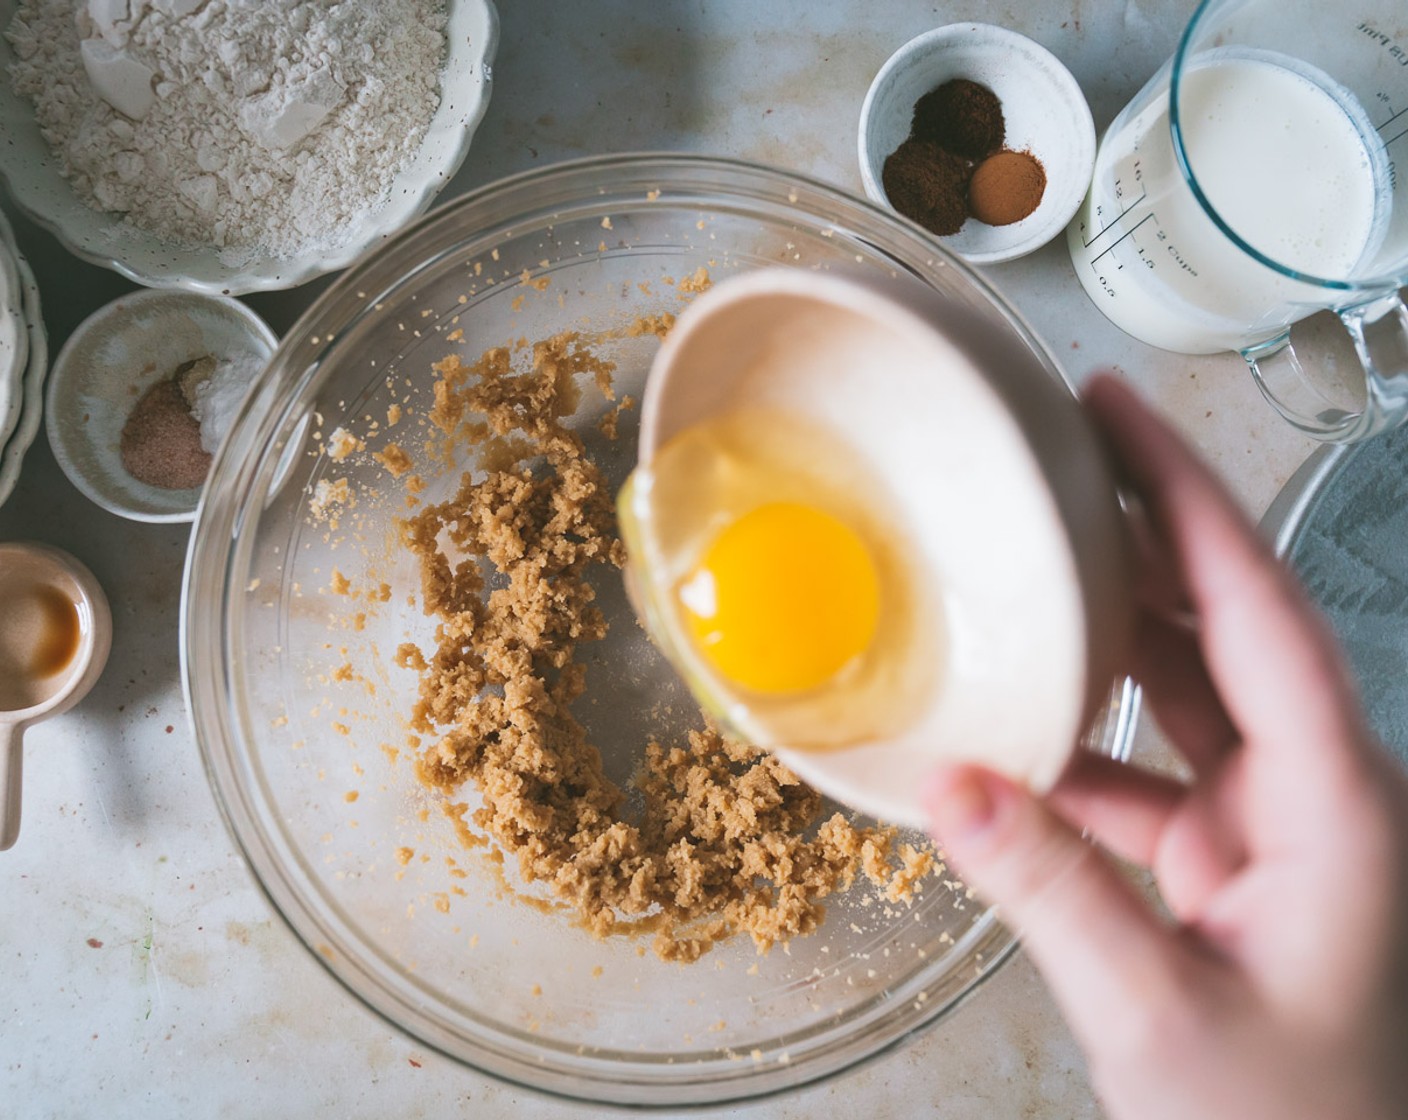 step 2 In a standing mixer or using a hand mixer, mix the Butter (1/4 cup), Brown Sugar (1 cup), and Vanilla Extract (1 tsp) until light and fluffy. Add in the Egg (1) and mix just until combined.